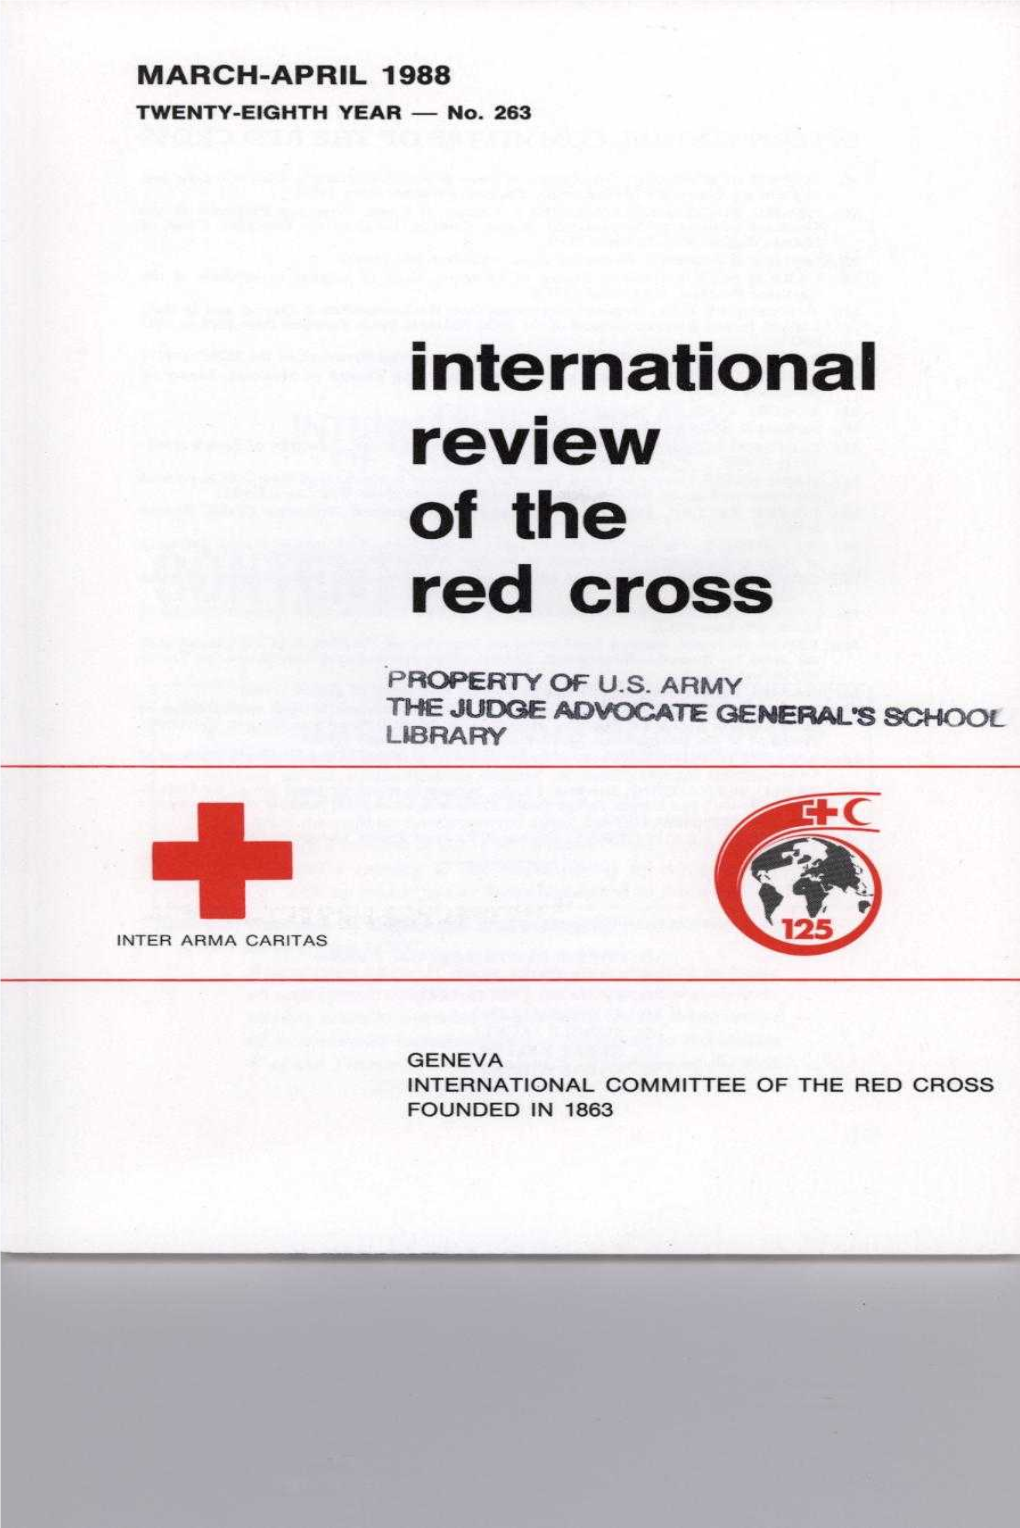 International Review of the Red Cross, March-April 1988, No